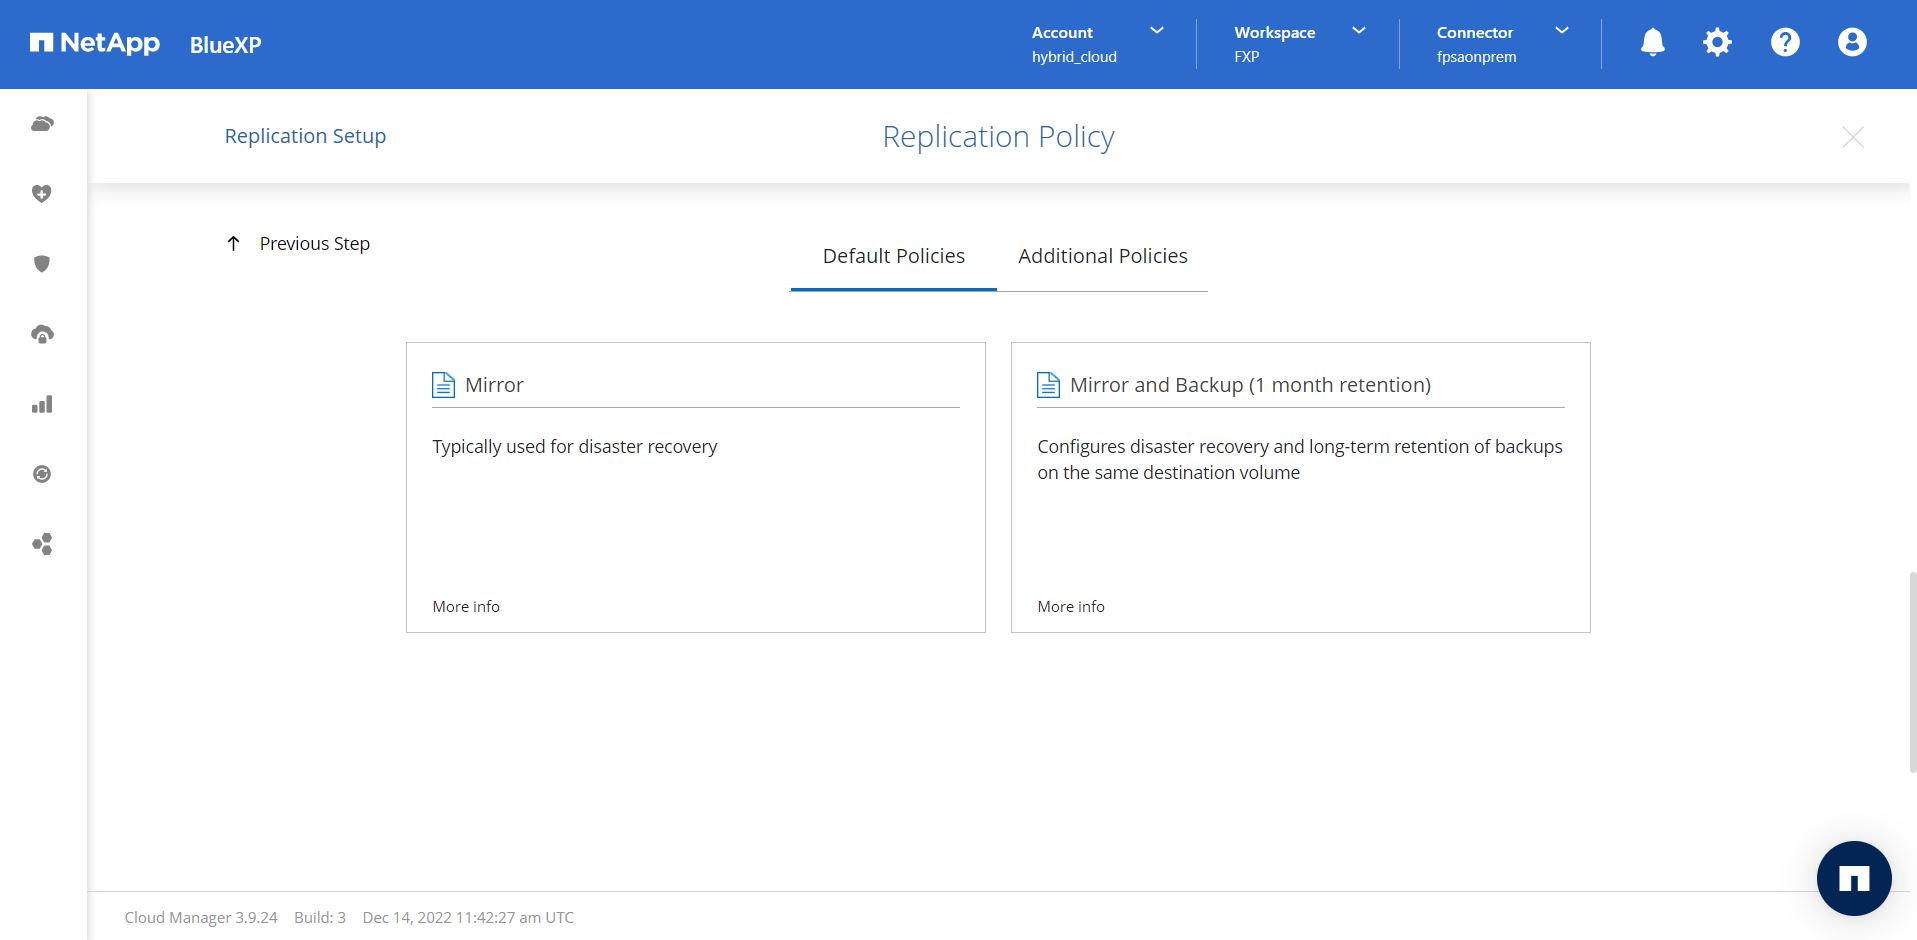 This screenshot shows the BlueXP Replication Policy page with the Default policies of Mirror or Mirror and Backup displayed.